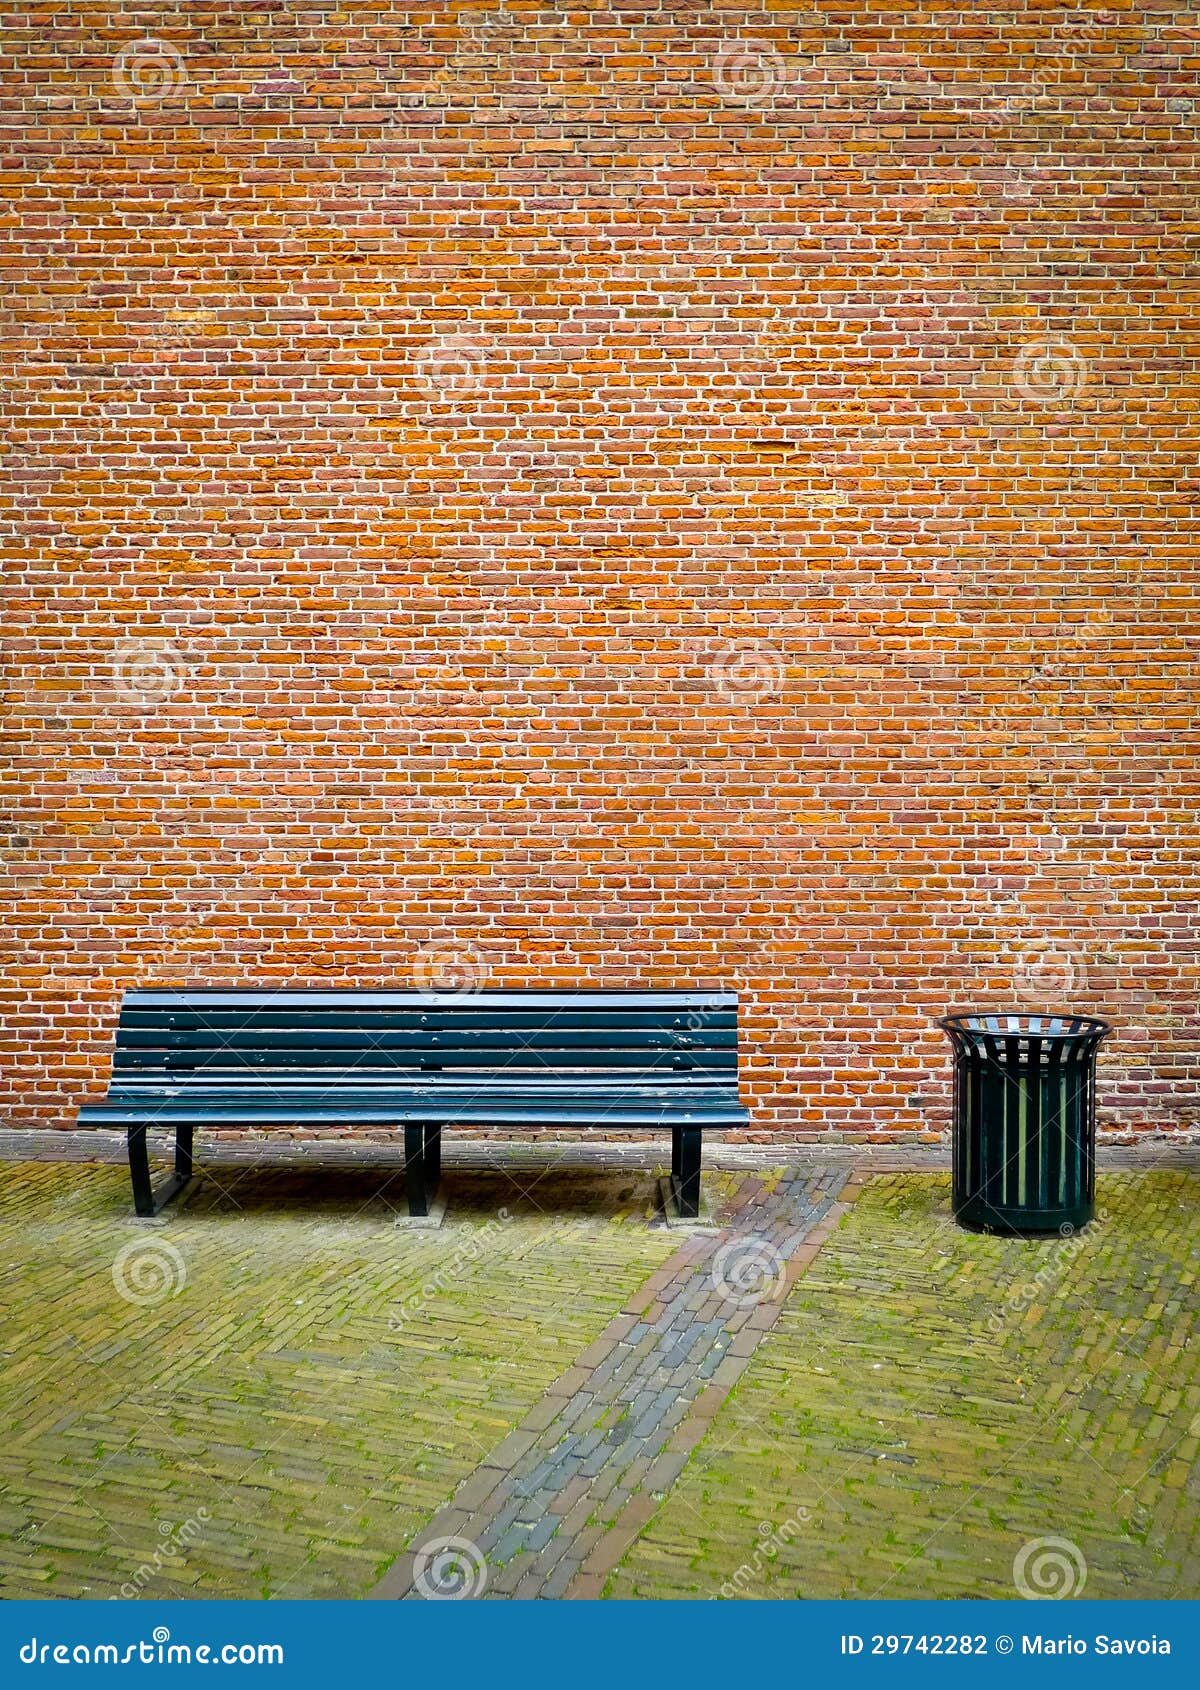 Old black bench and trashcan in front of a red brick wall.